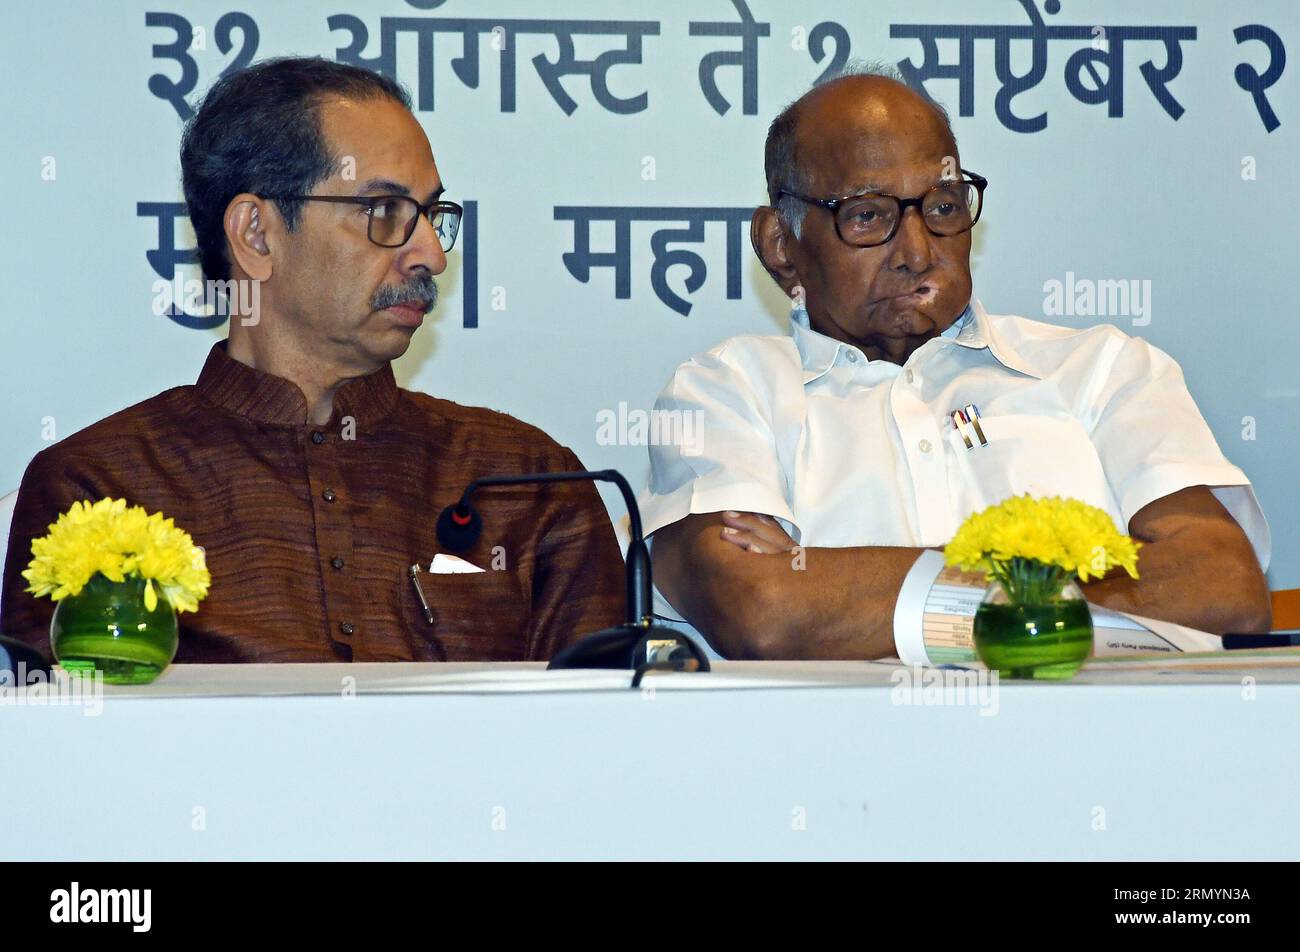 Mumbai, India. 30th Aug, 2023. L-R Shiv Sena (UBT) chief Uddhav Thackeray and Nationalist Congress Party (NCP) chief Sharad Govindrao Pawar are seen during the Maha Vikas Aghadi (MVA) press conference in Mumbai. The press conference was held ahead of Indian National Developmental Inclusive Alliance (INDIA) third meeting to be held on 31st August and 1st September 2023. (Photo by Ashish Vaishnav/SOPA Images/Sipa USA) Credit: Sipa USA/Alamy Live News Stock Photo